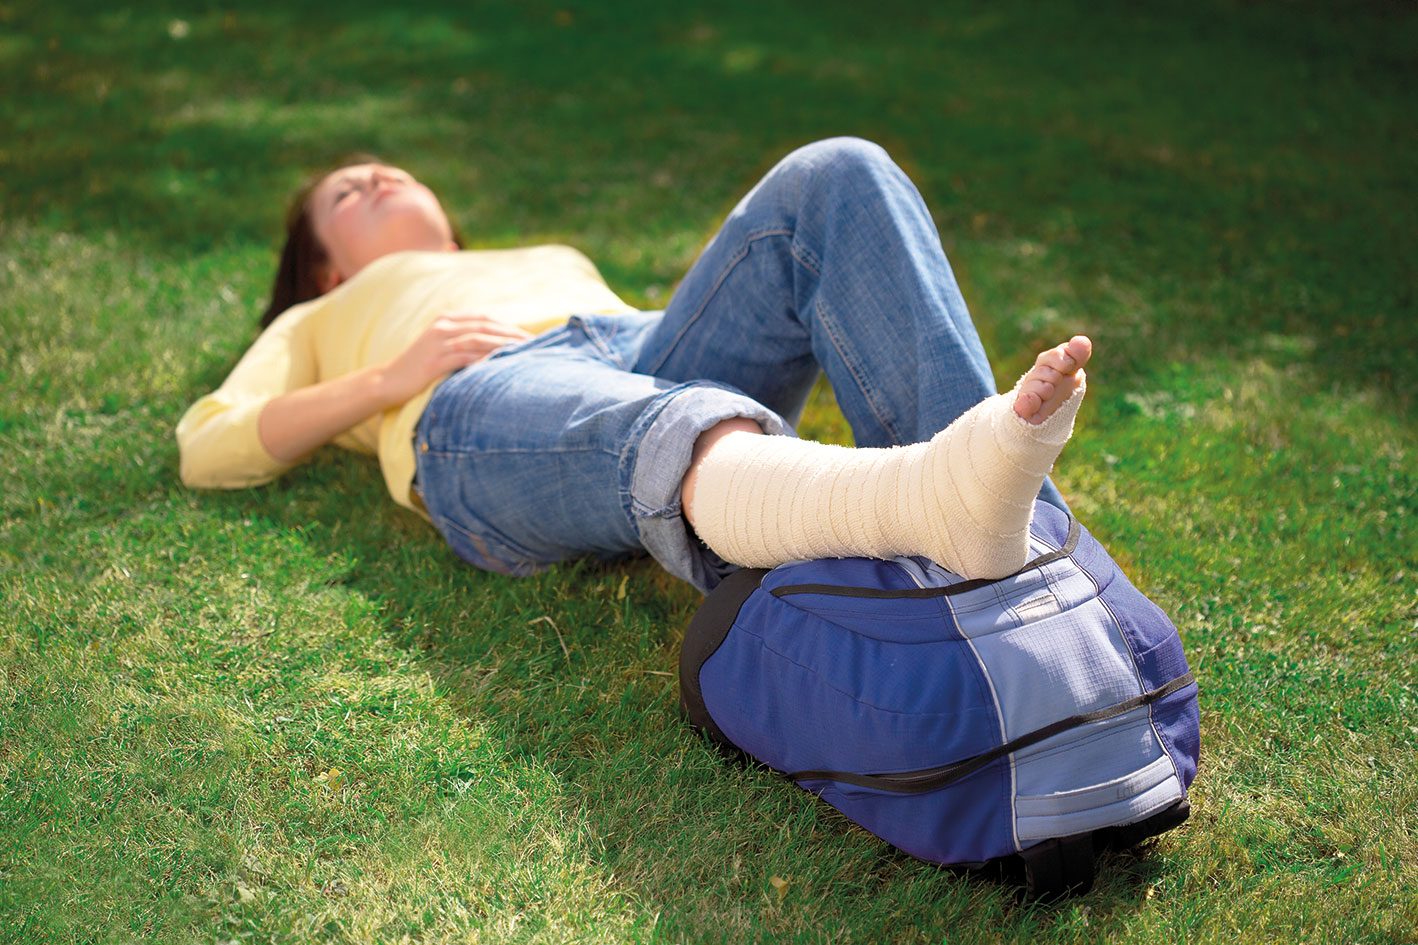 First Aid Tips for a Sprained Ankle Reader's Digest